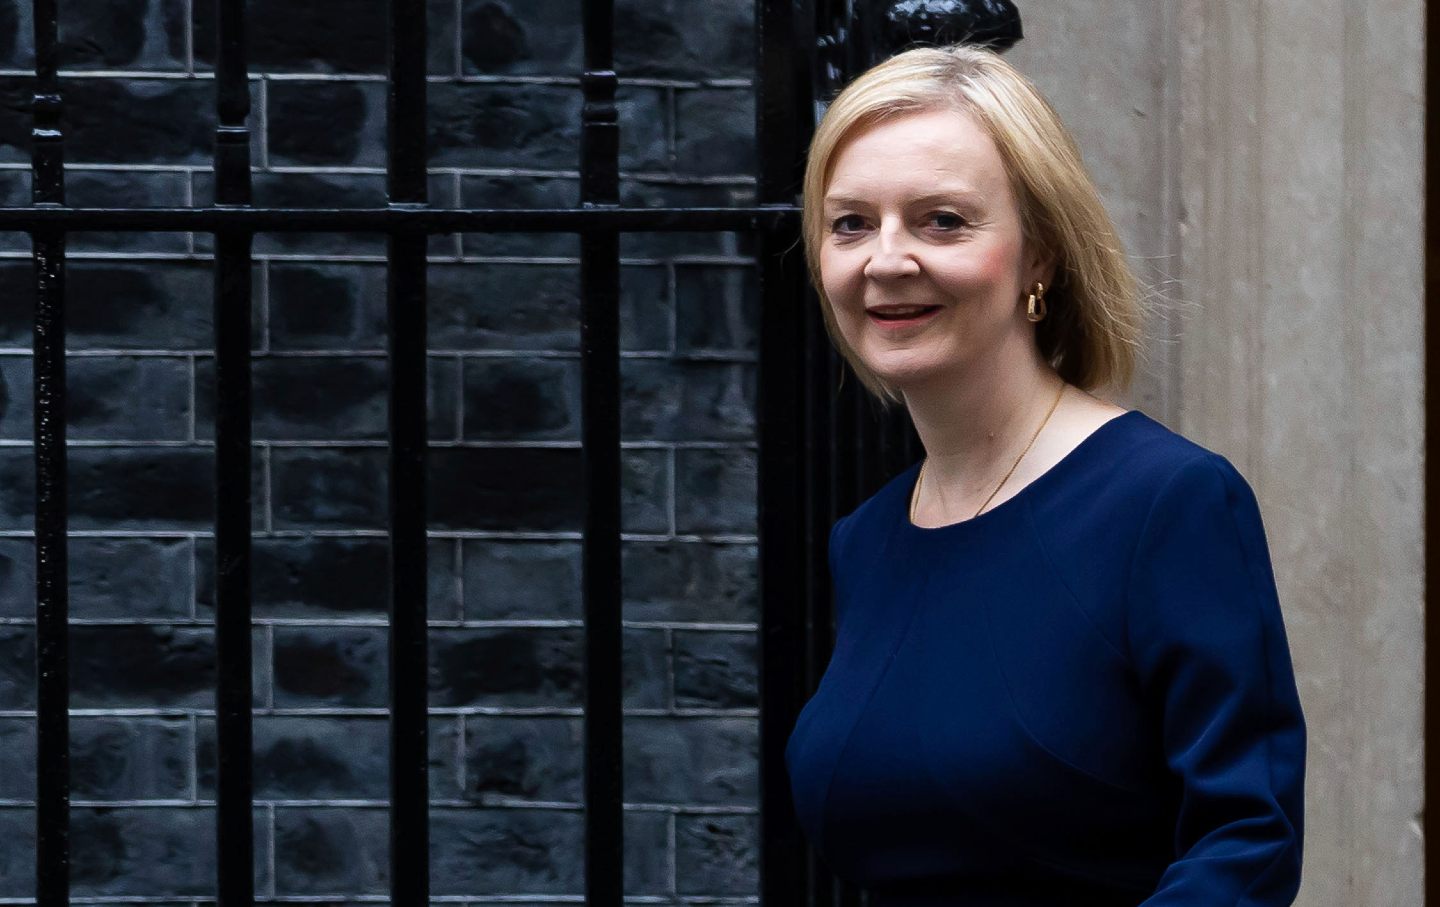 Now-former Prime Minister Liz Truss is candidly pictured leaving 10 Downing Street.